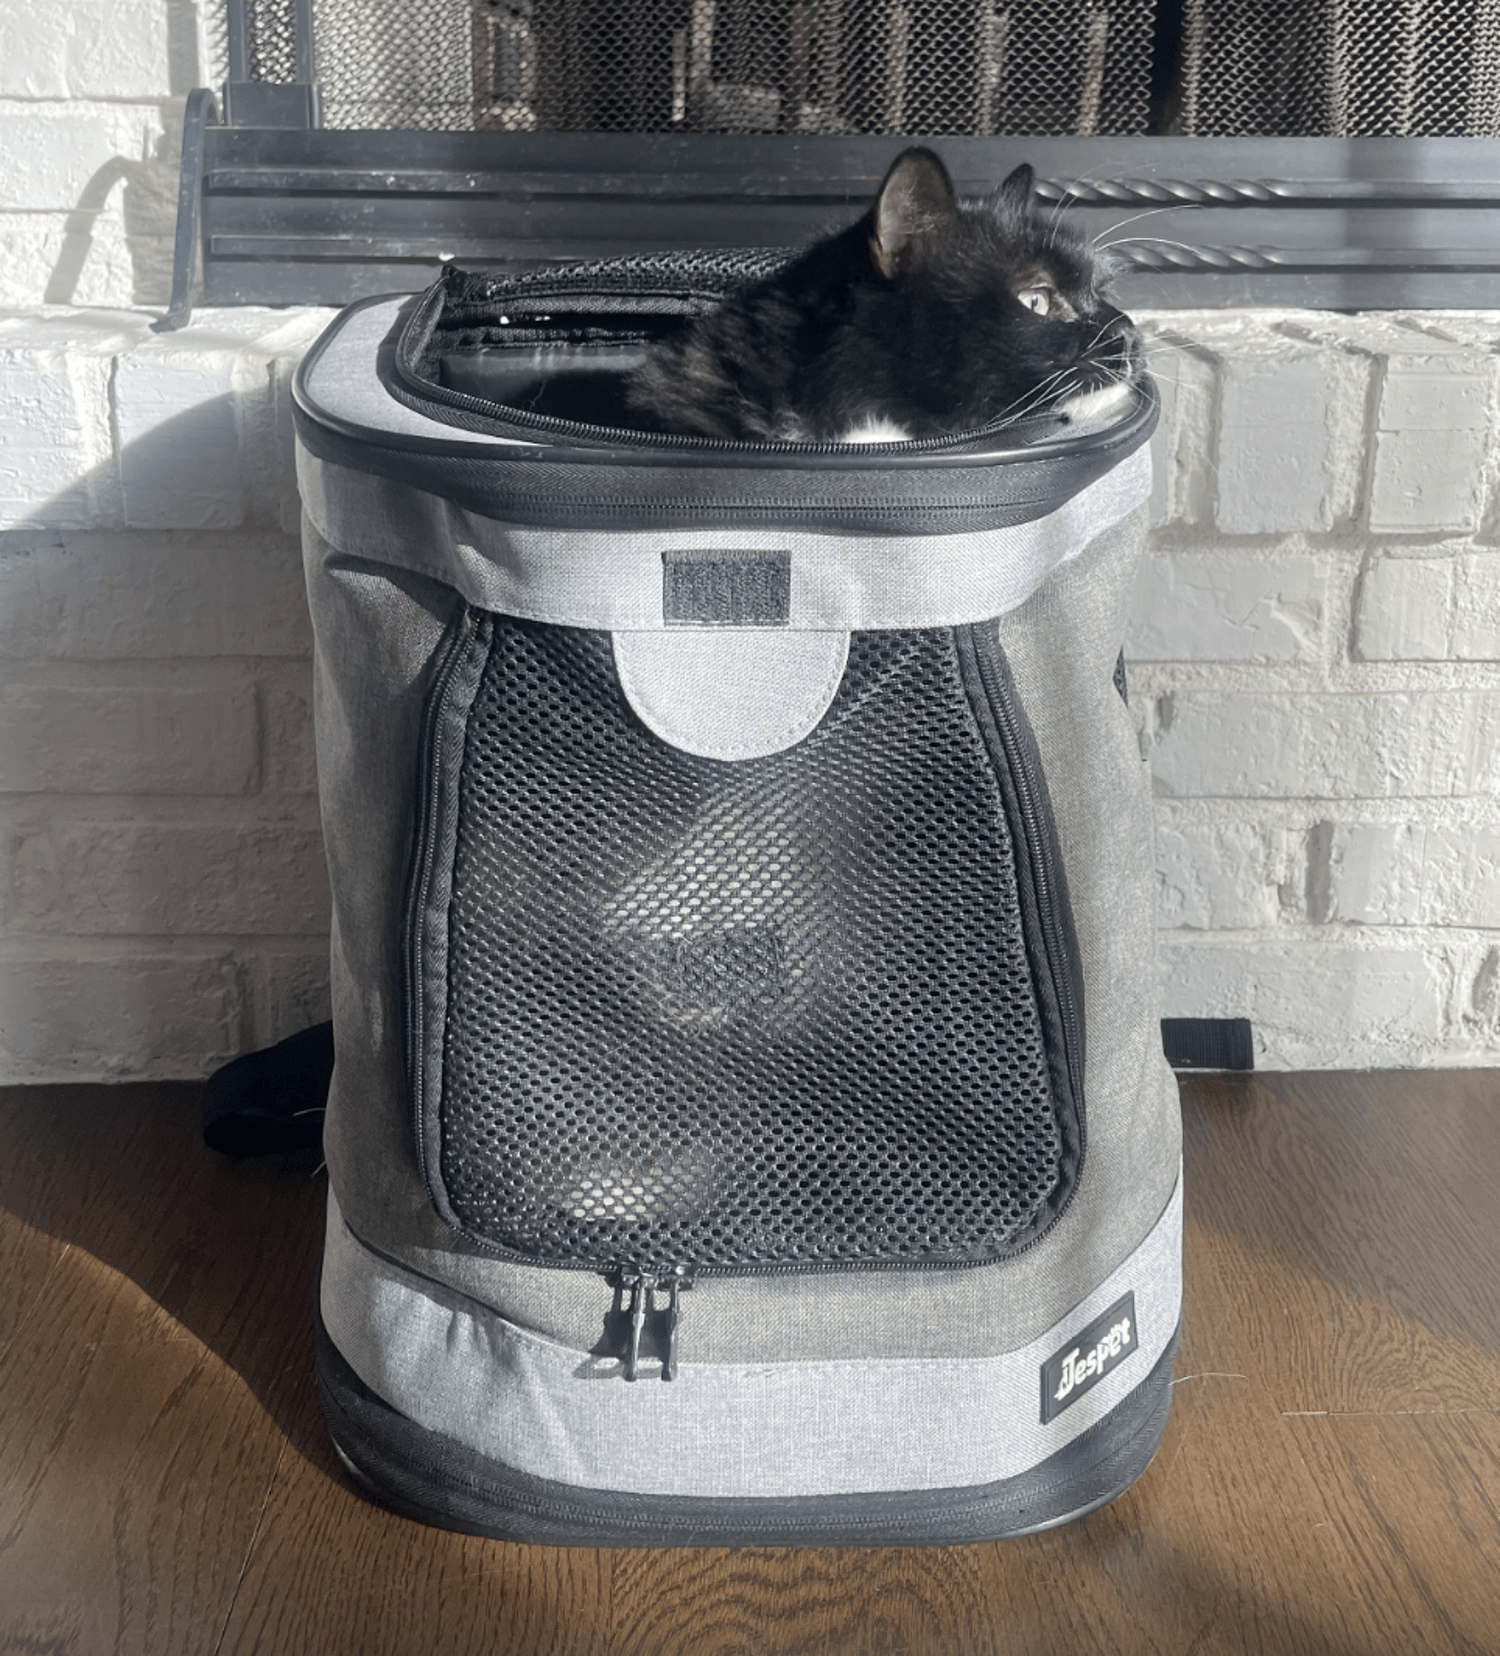 The best cat carriers for stress-free travel